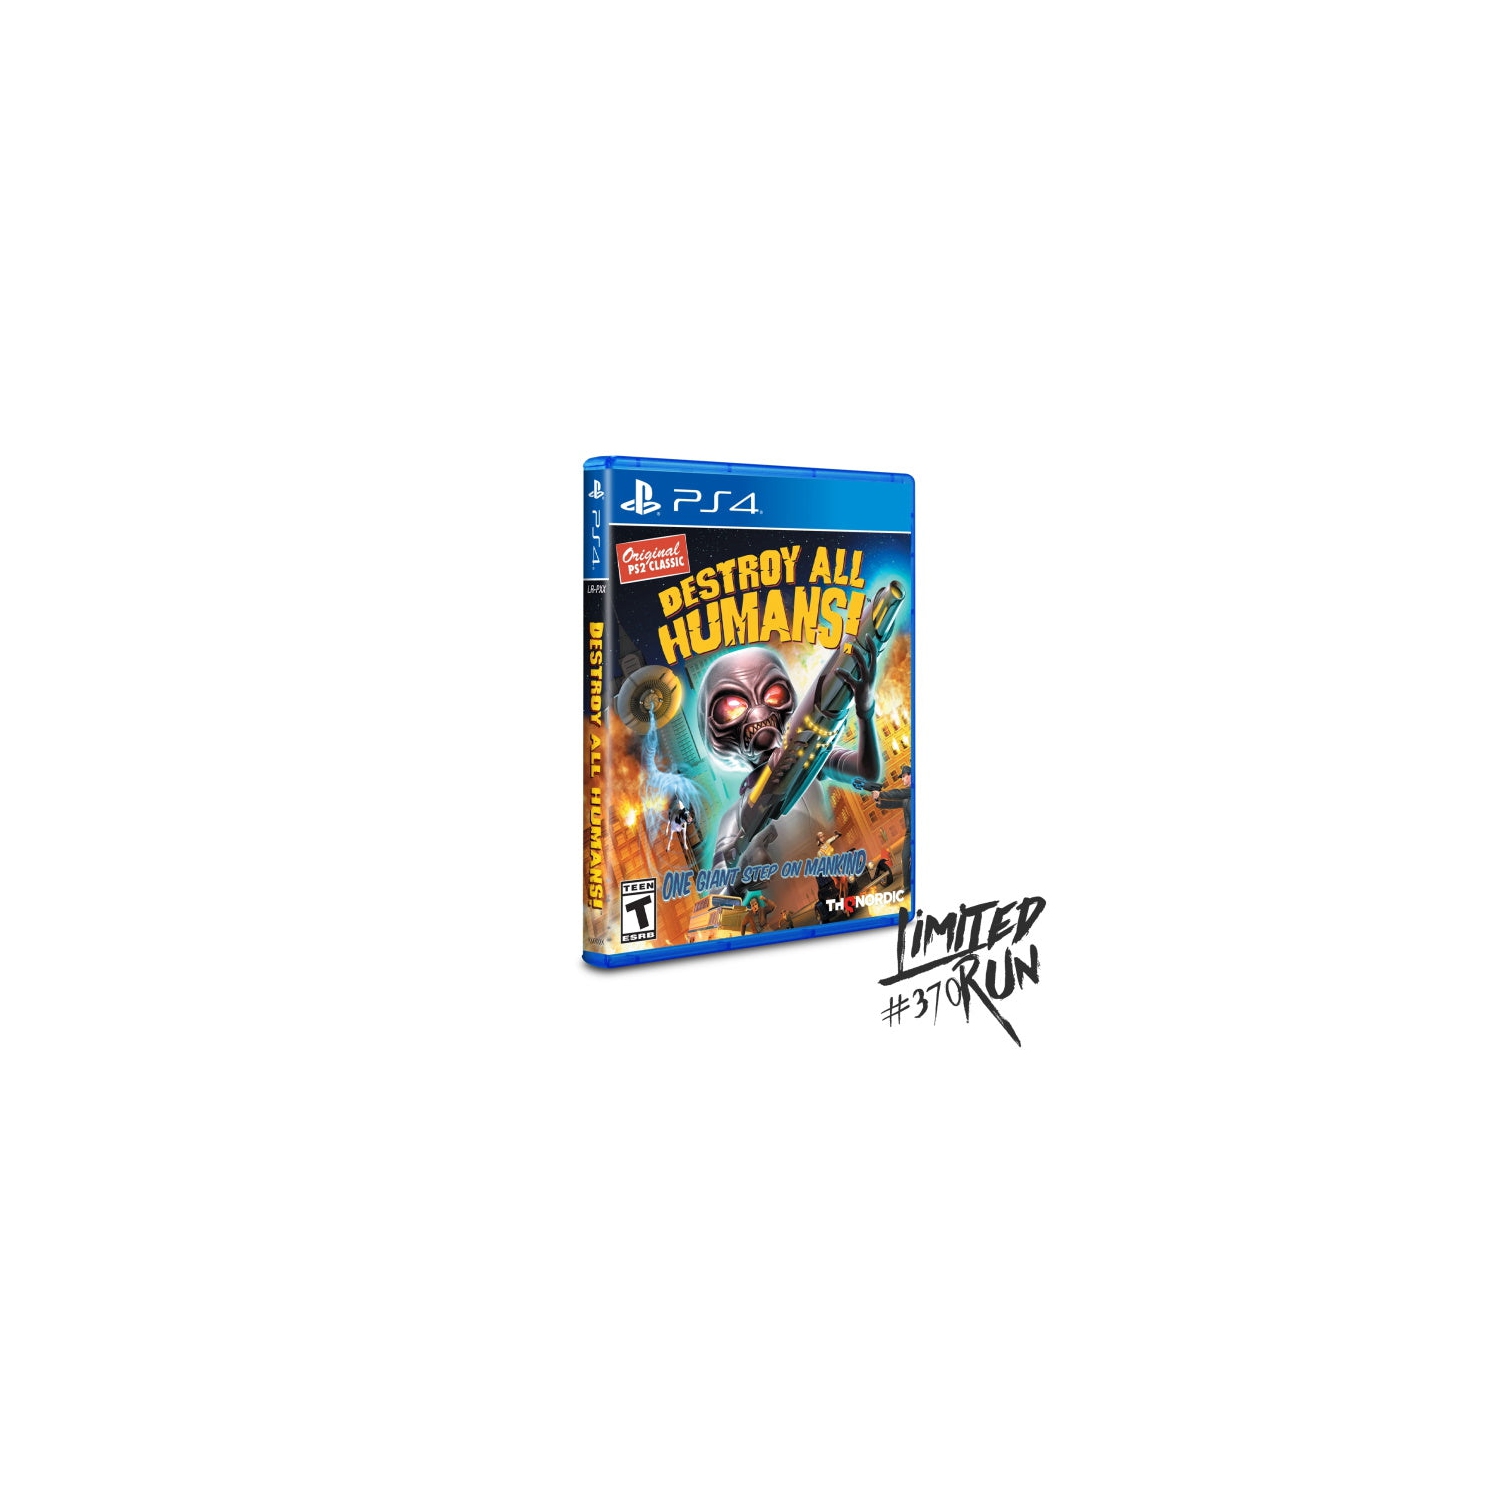 Destroy All Humans! - Original PS2 Classic - Limited Run #370 [PlayStation 4]